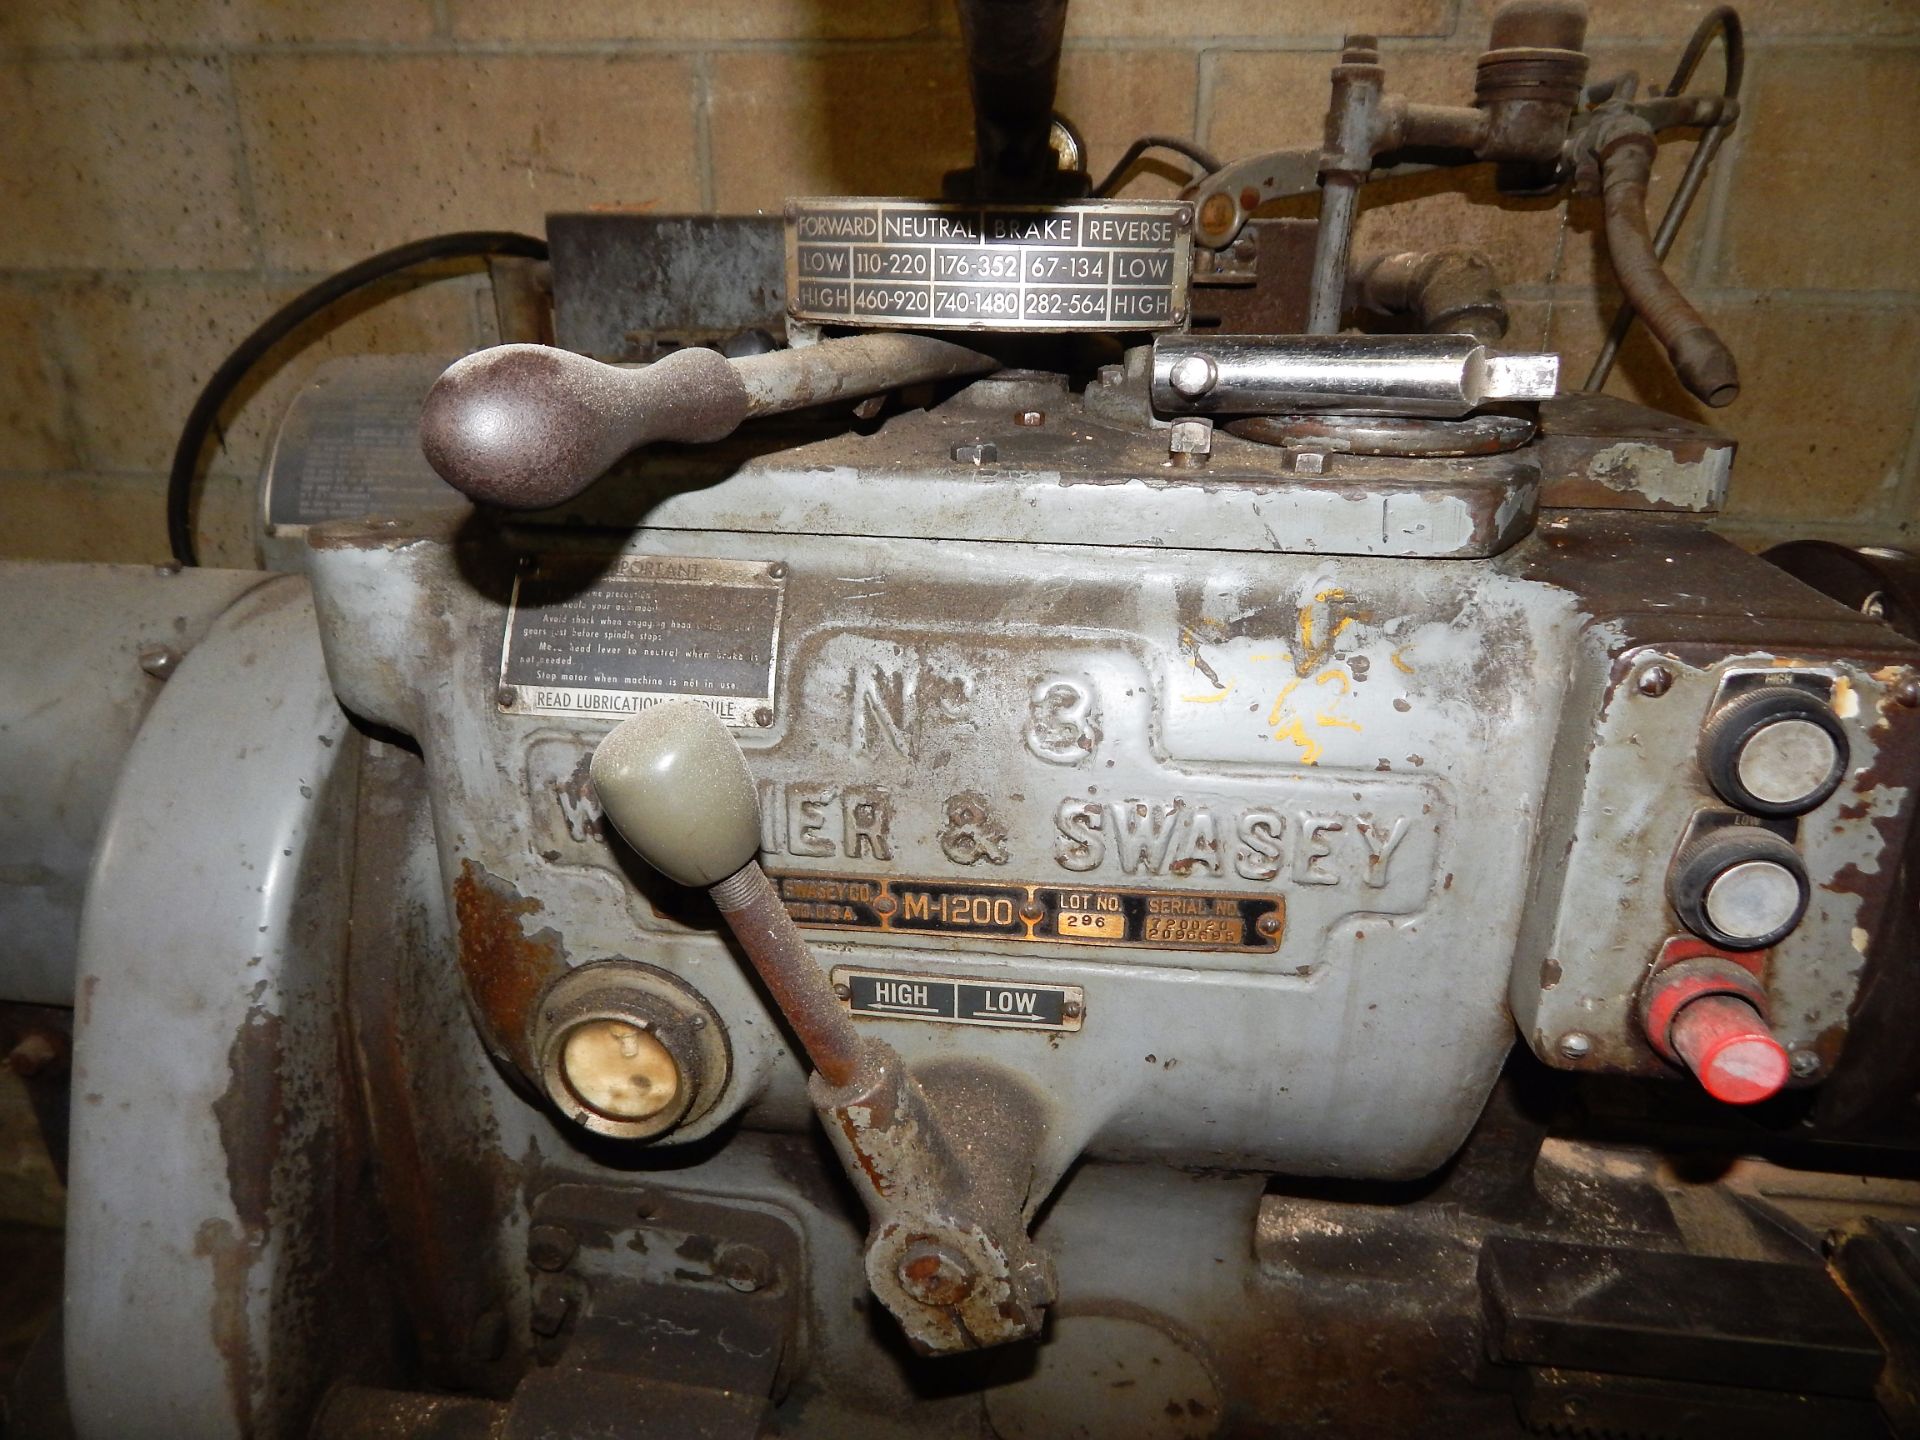 WARNER & SWASEY MDL. M-1200 NO. 3 6-POSITION TURREY LATHE WITH 10" 3-JAW CHUCK, LOT NO. 296, 67-1480 - Image 3 of 3